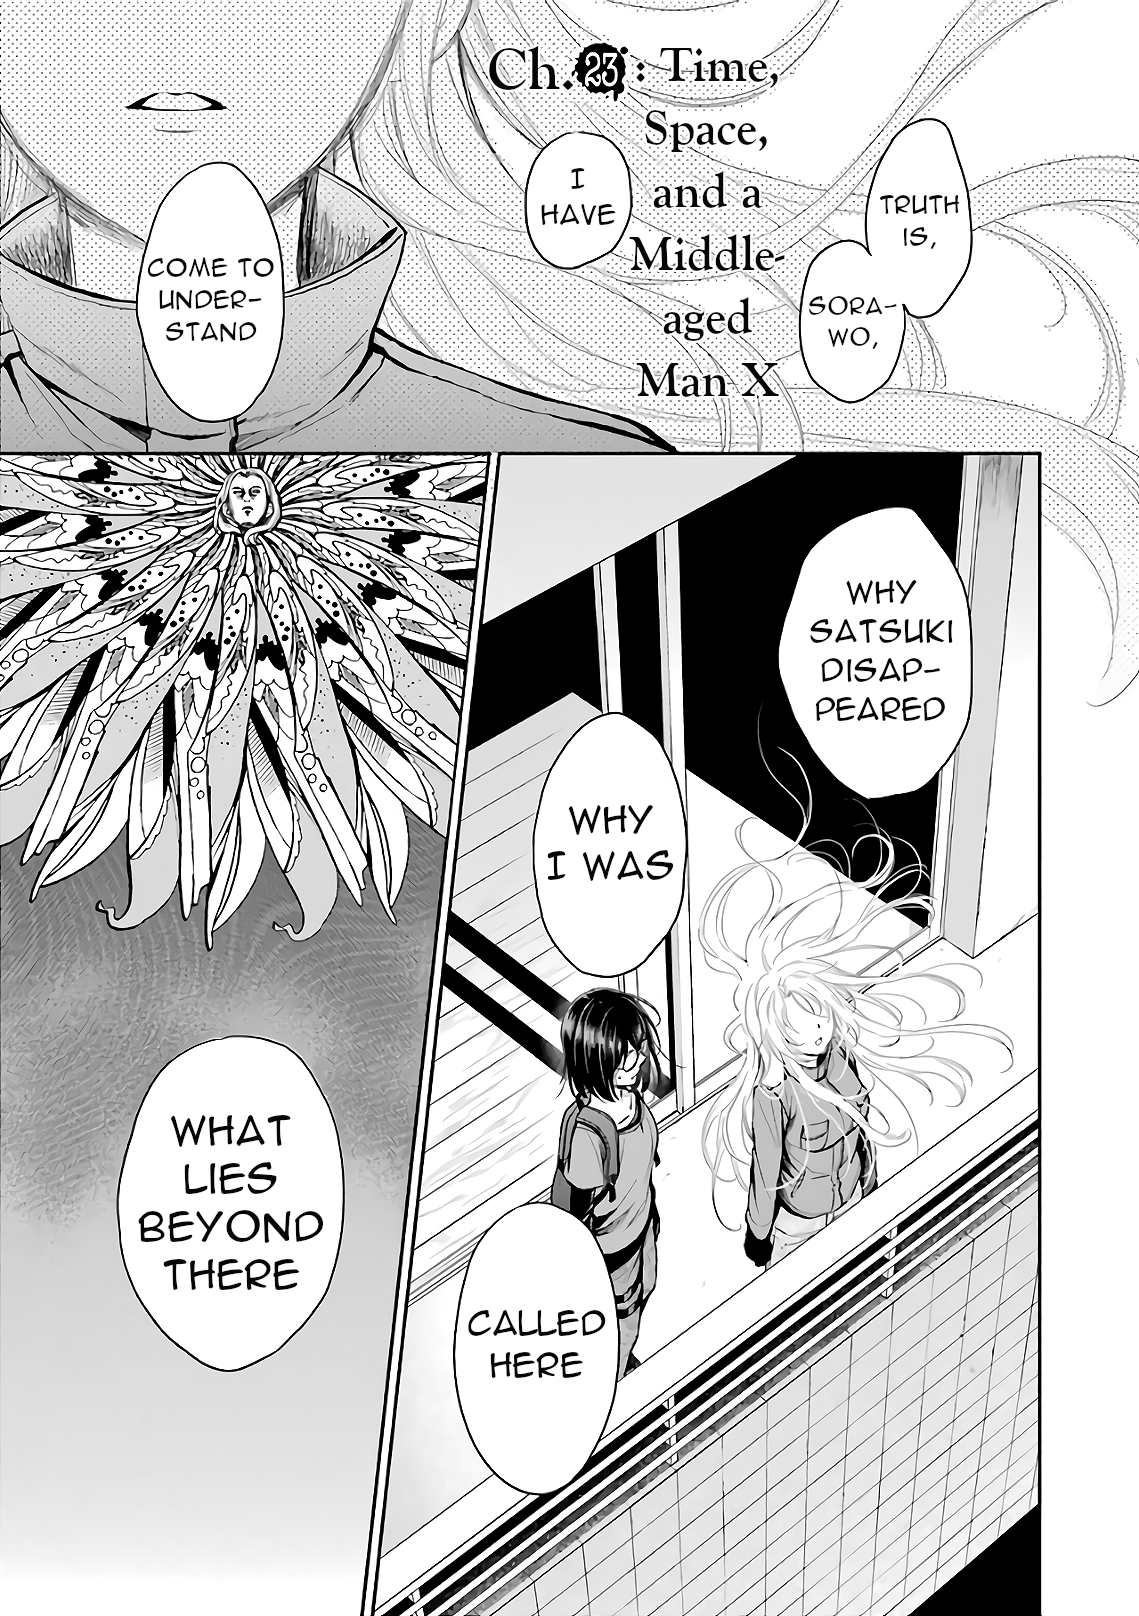 Urasekai Picnic Vol.4 Chapter 23: Time, Space And A Middle-Aged Man X - Picture 1